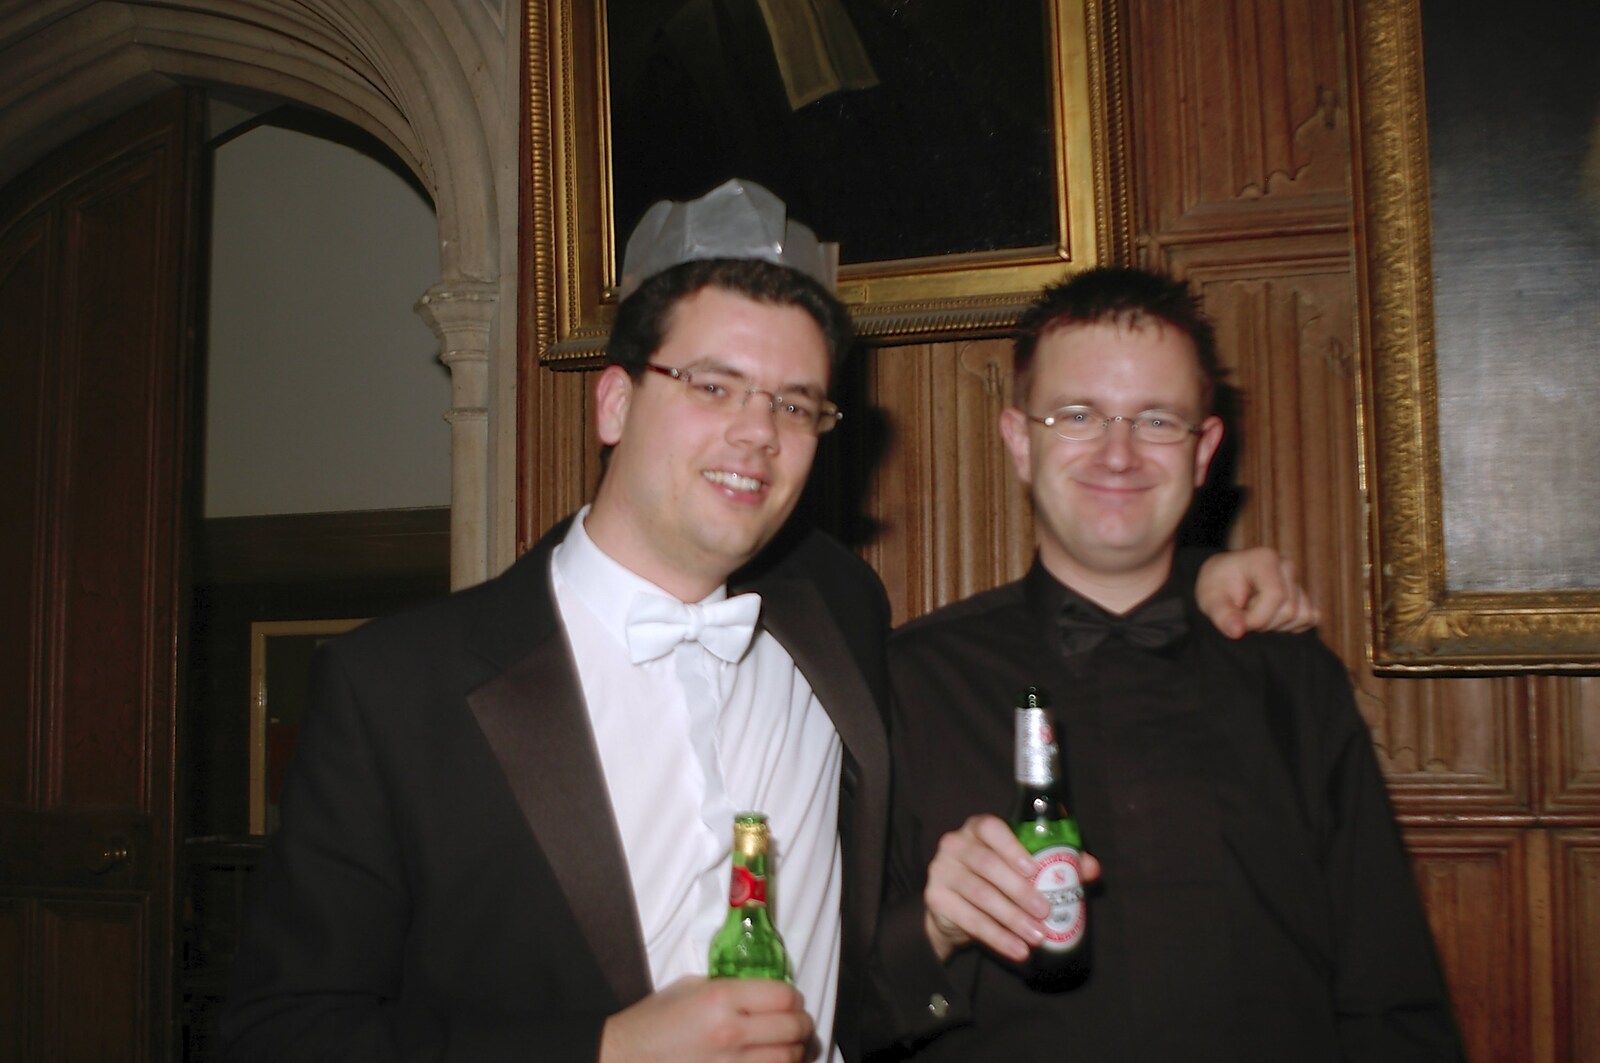 Dave and Nosher from Qualcomm Cambridge's Christmas Do, King's College, Cambridge - 22nd December 2004